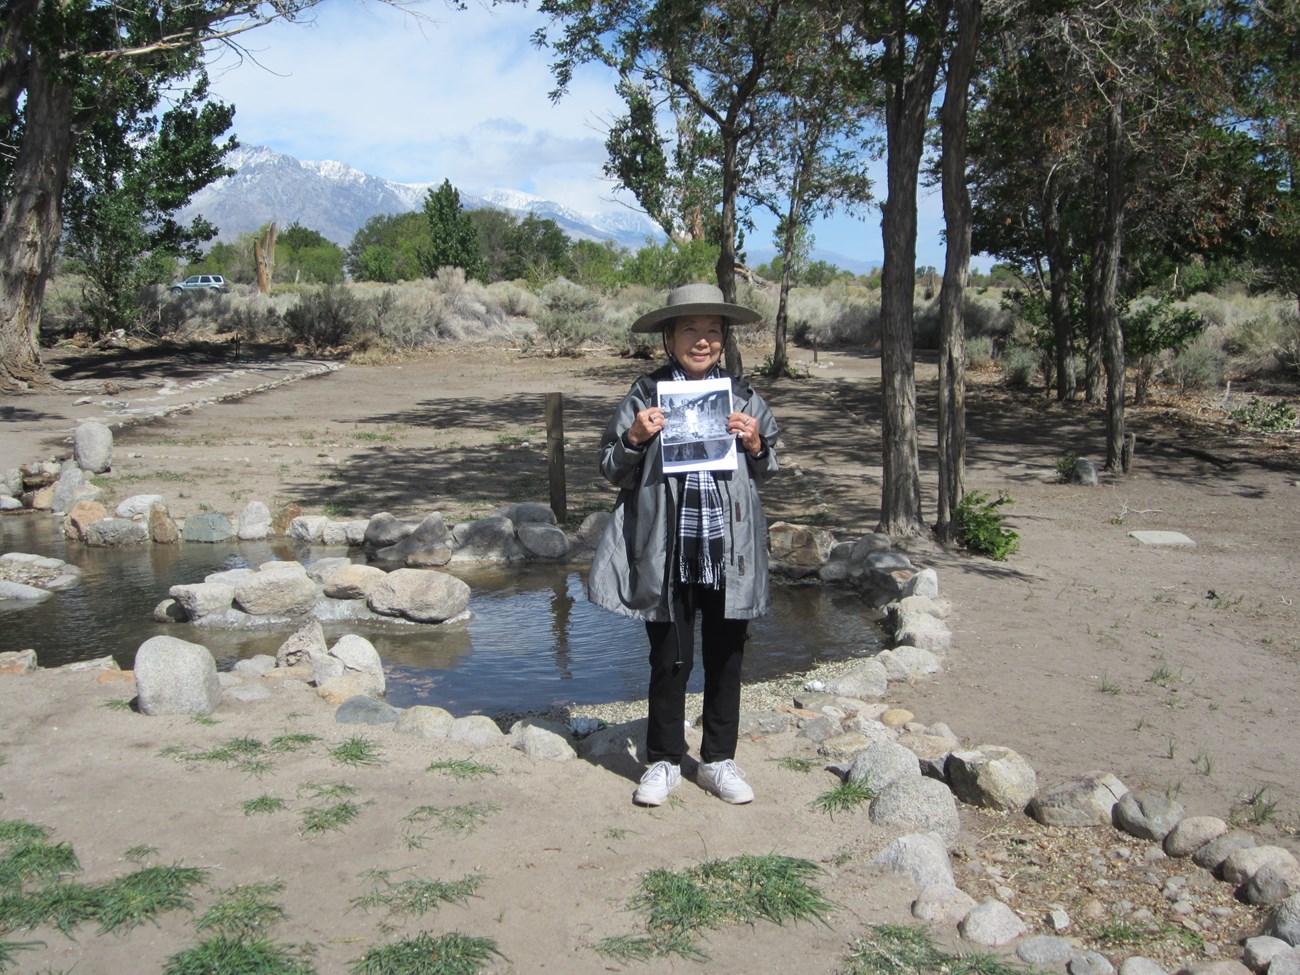 A woman stands in front of a stone-lined pond in an arid landscape, holding a photo of herself as a child in the same location